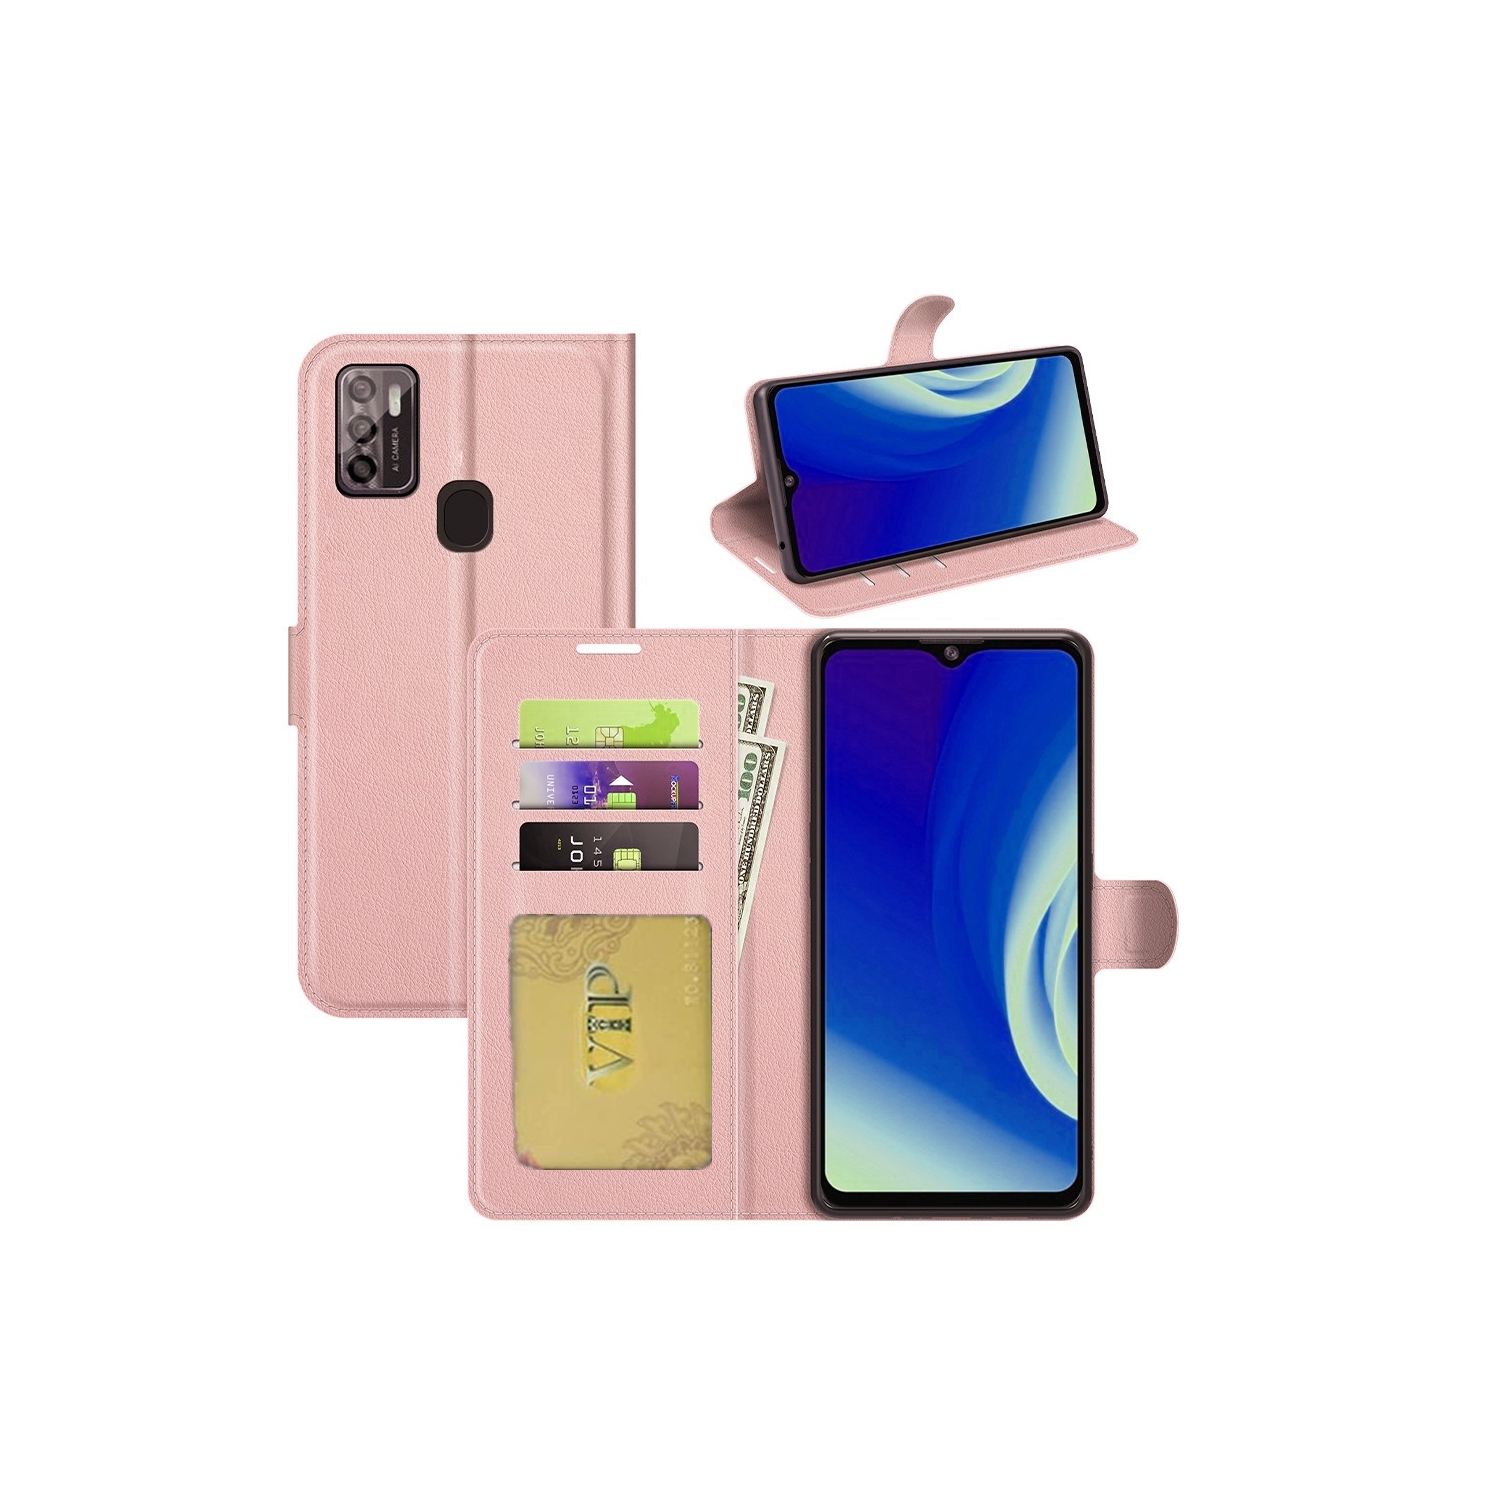 【CSmart】 Magnetic Card Slot Leather Folio Wallet Flip Case Cover for ZTE Blade A7P, Rose Gold